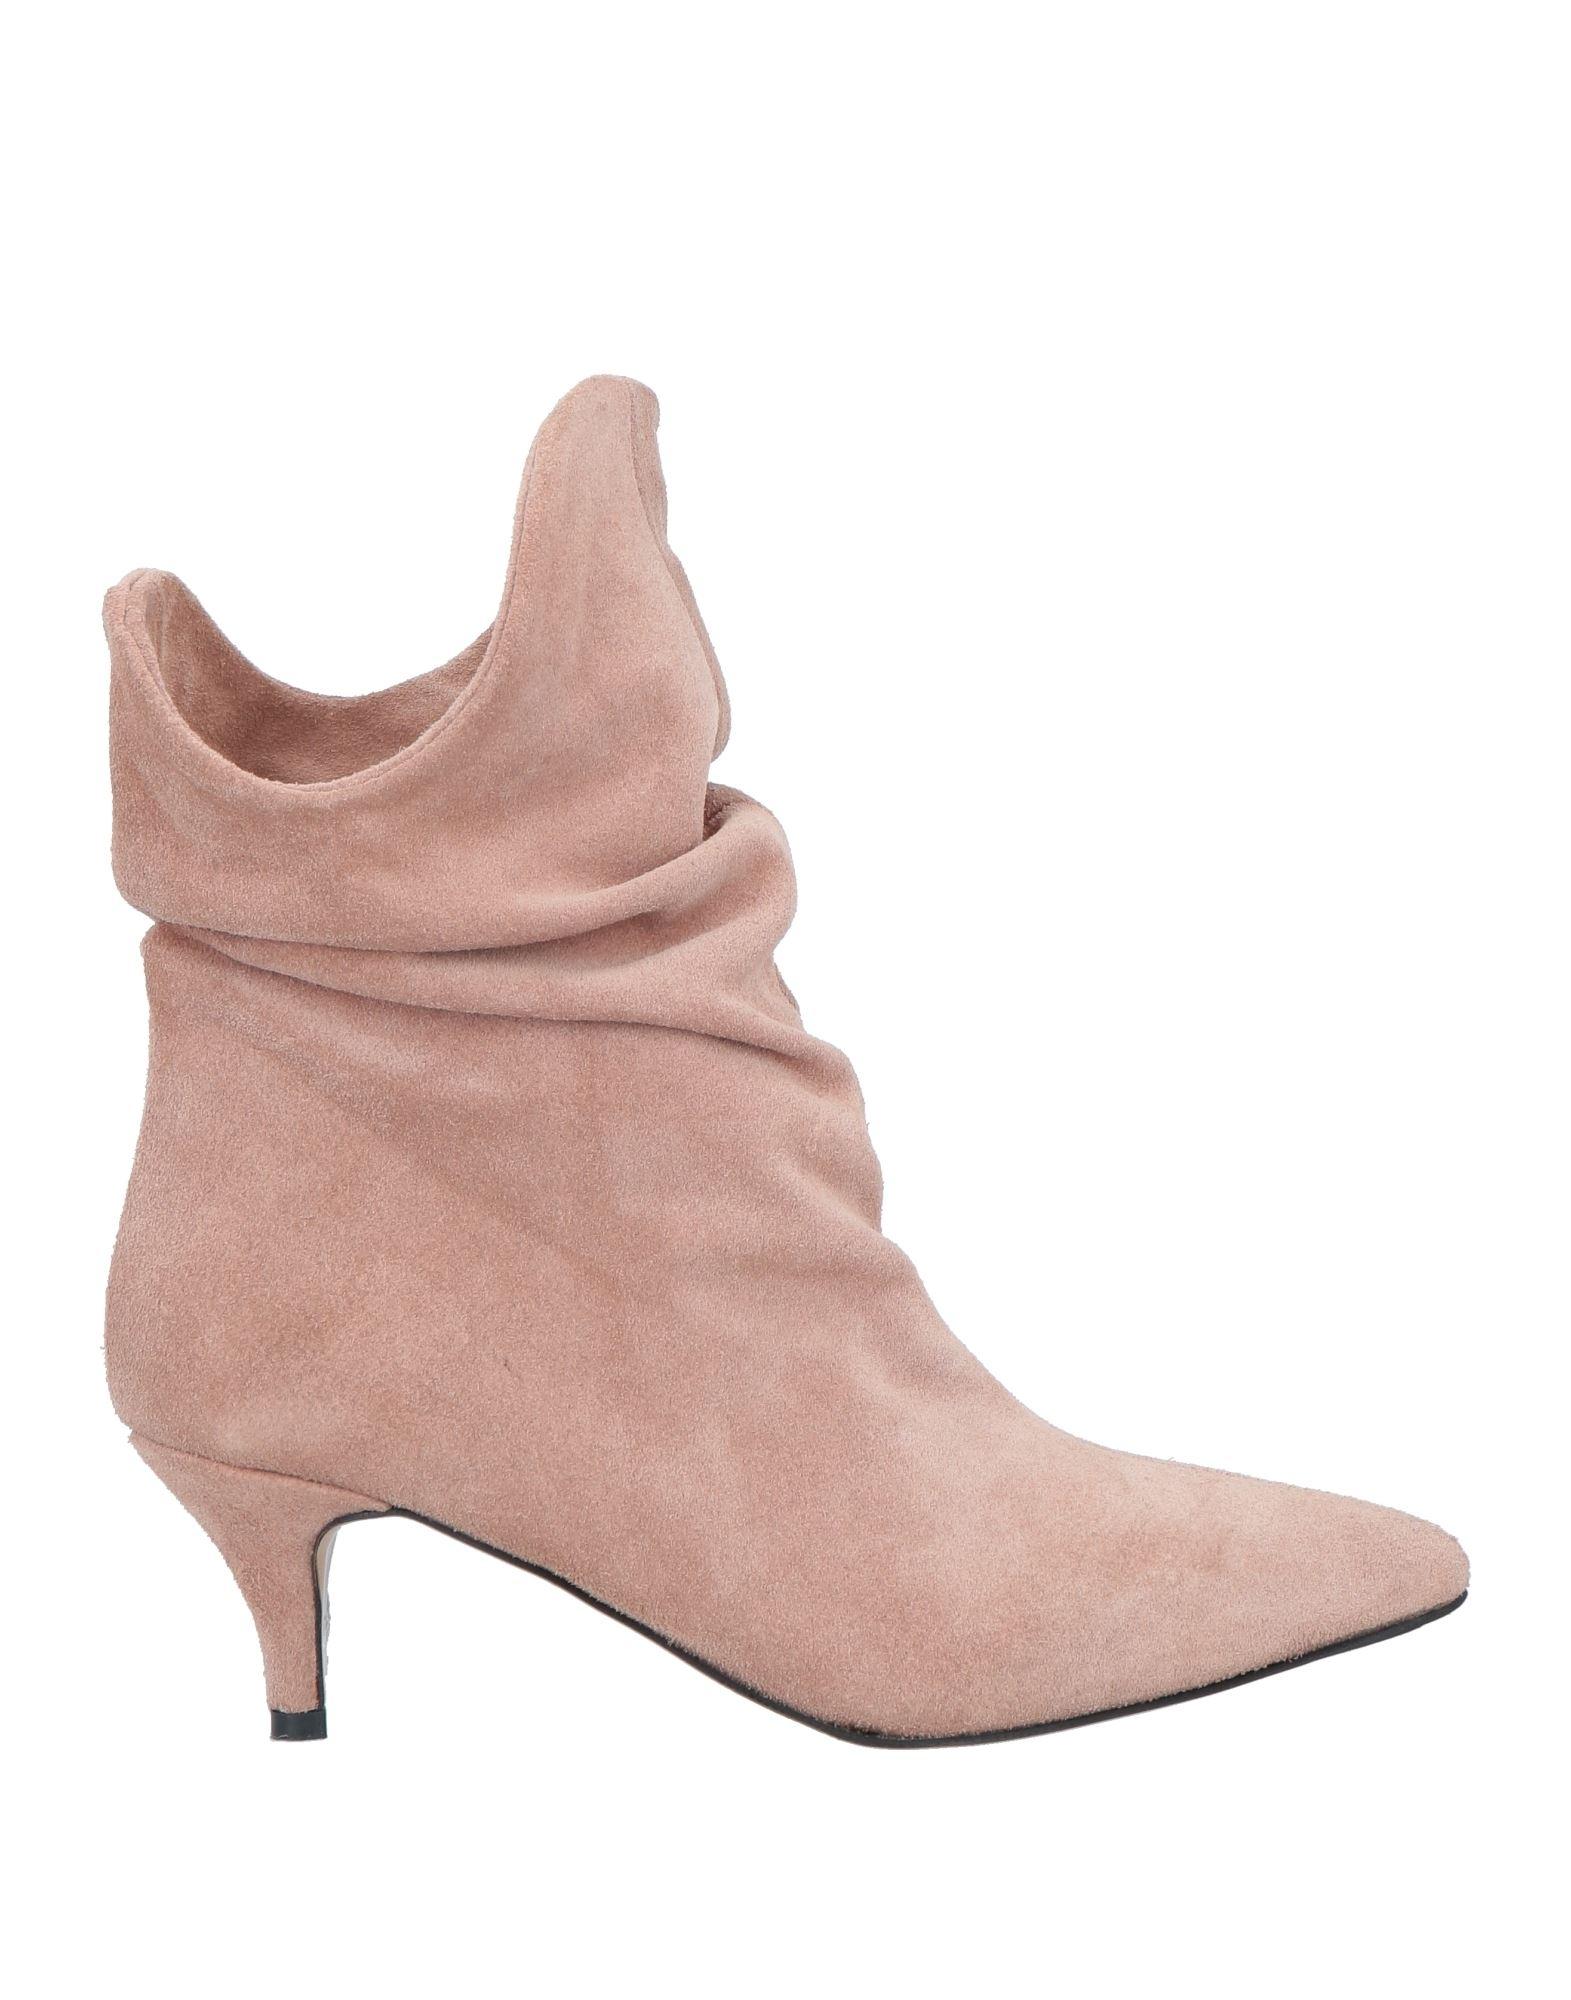 Ovye' By Cristina Lucchi Ankle Boots in Pink | Lyst